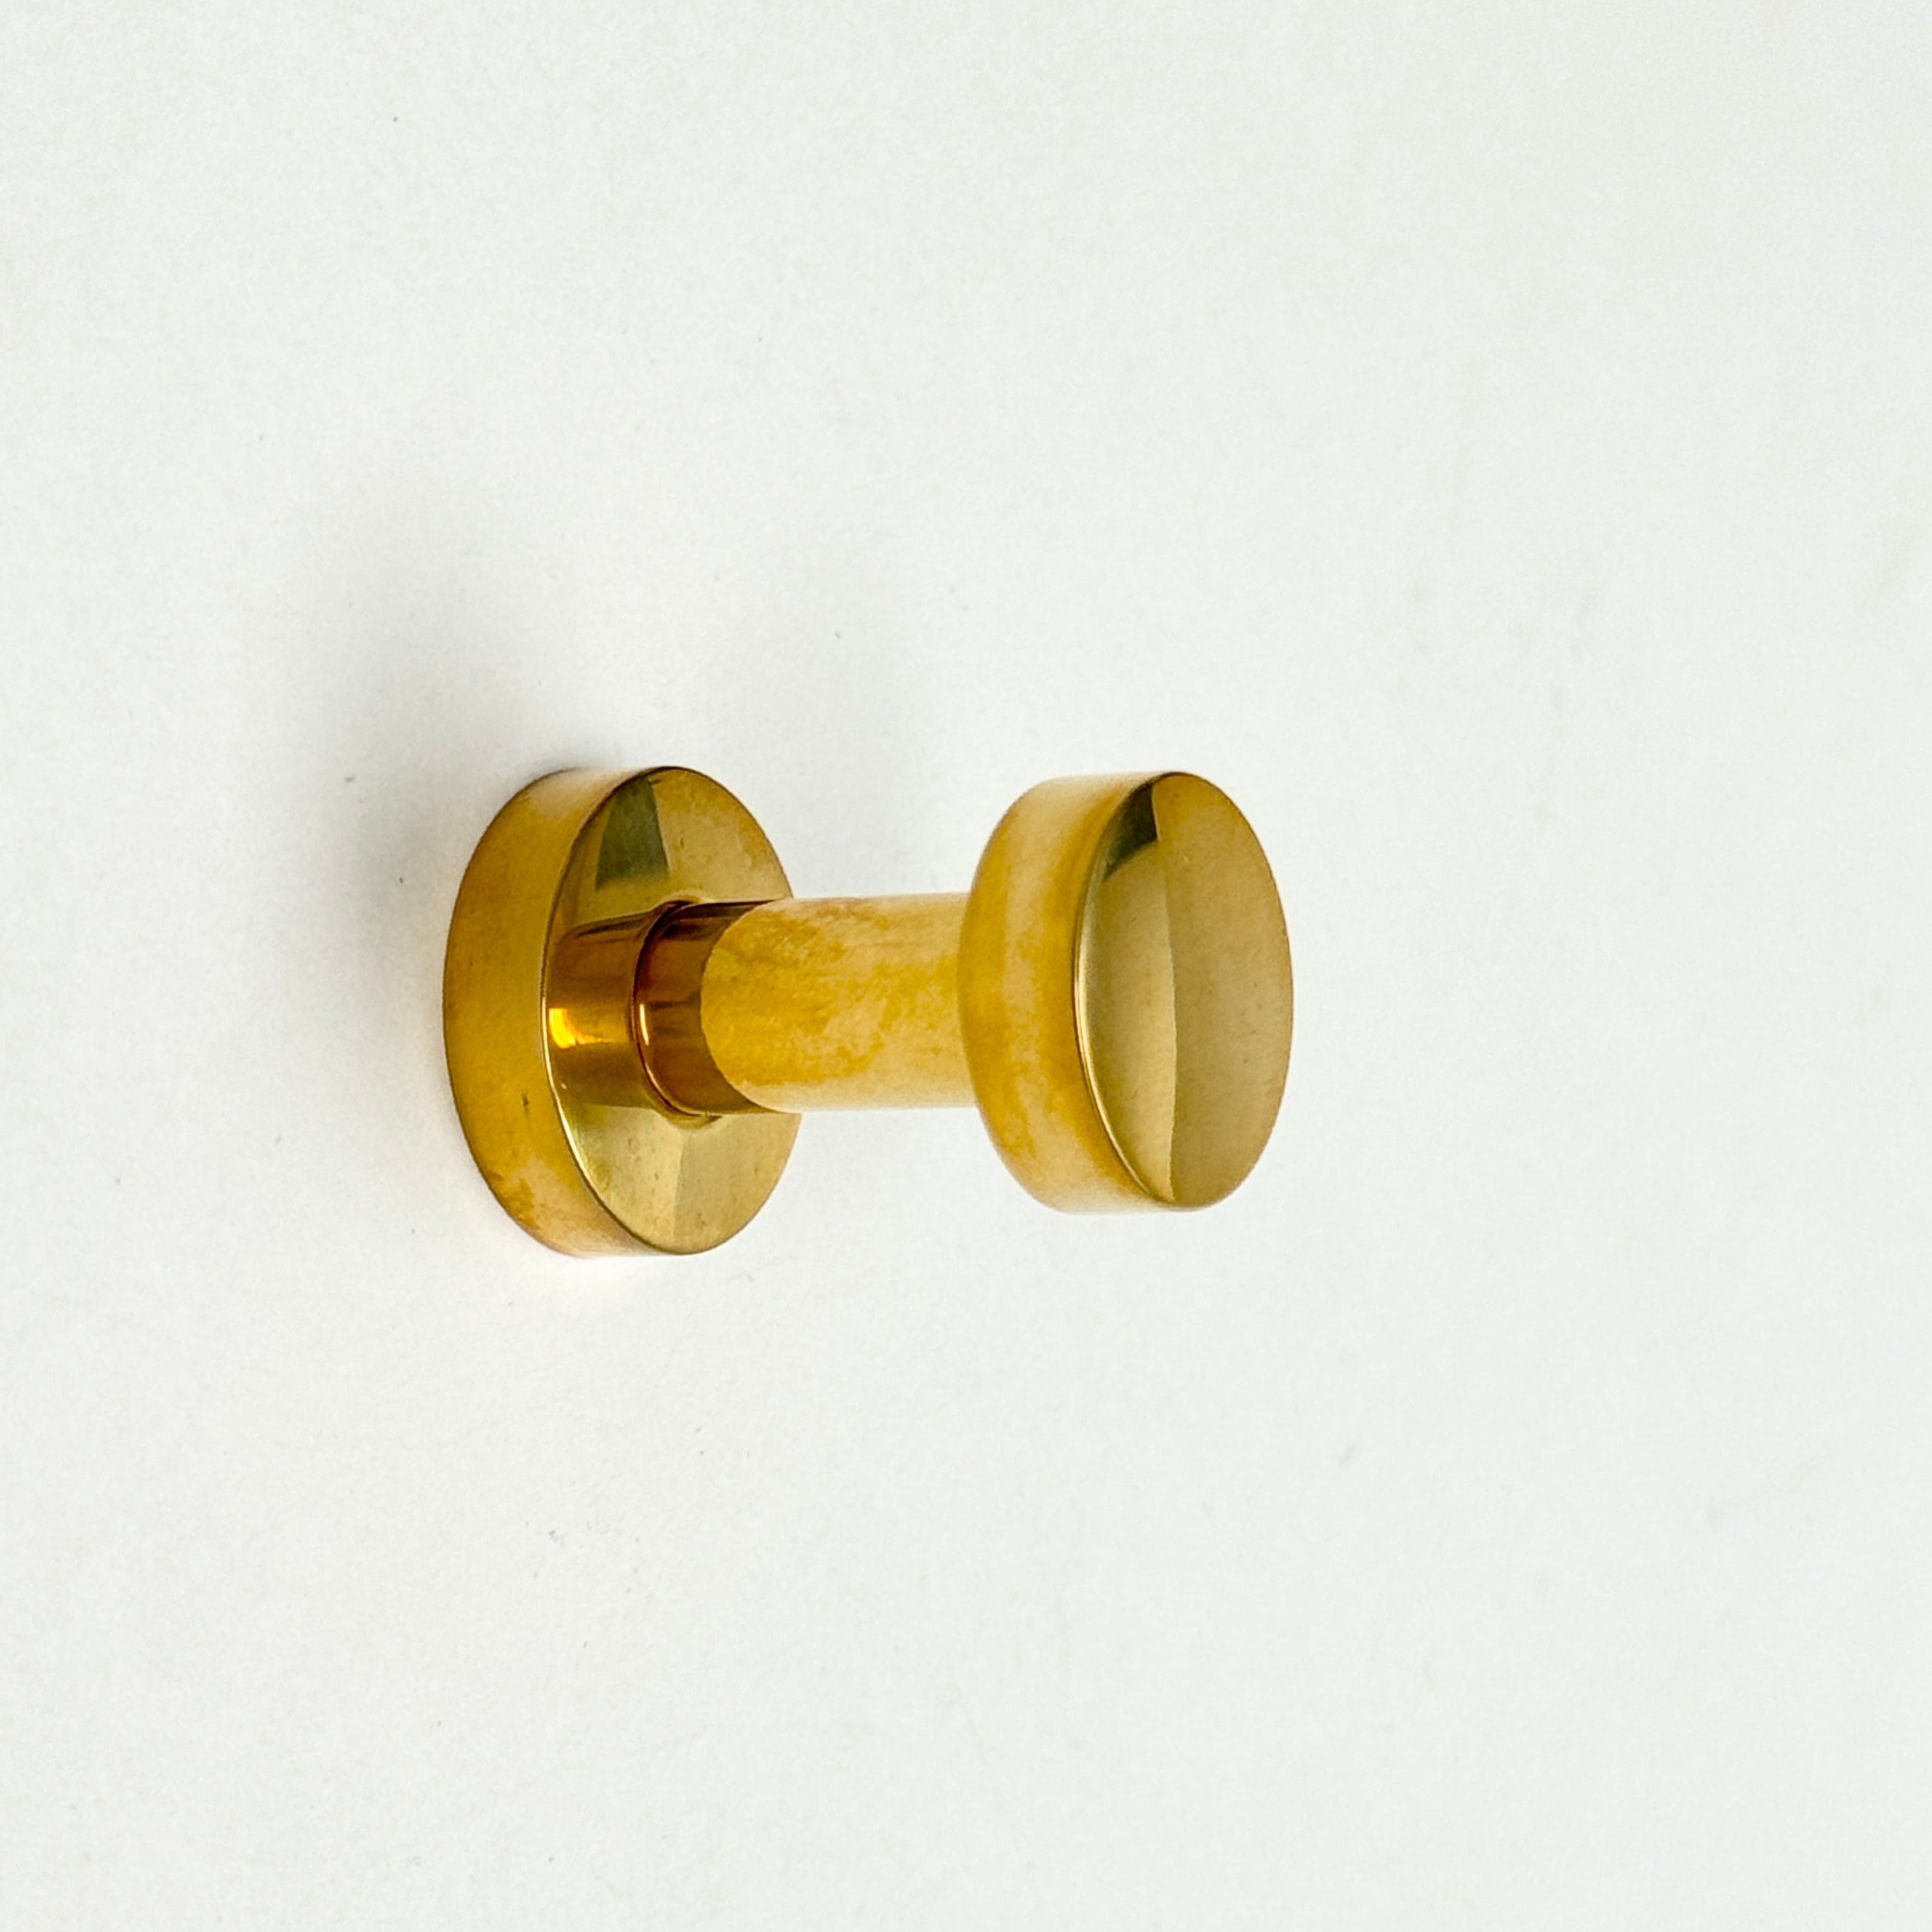 Polished Unlacquered Brass "Post" Hook - Industry Hardware